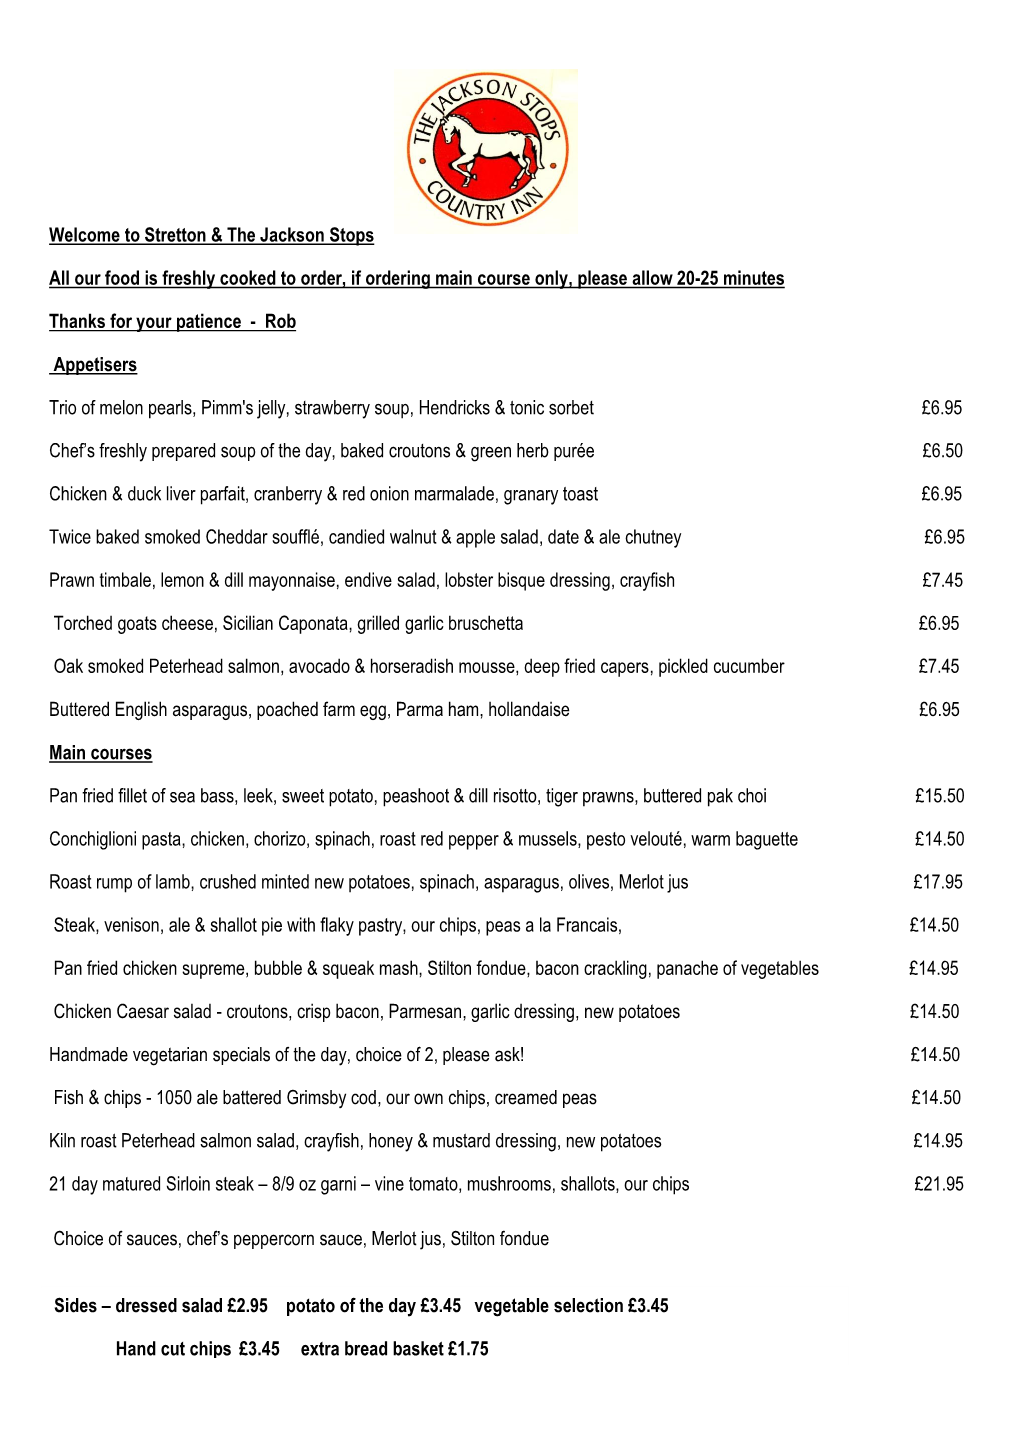 Stretton & the Jackson Stops All Our Food Is Freshly Cooked to Order, If